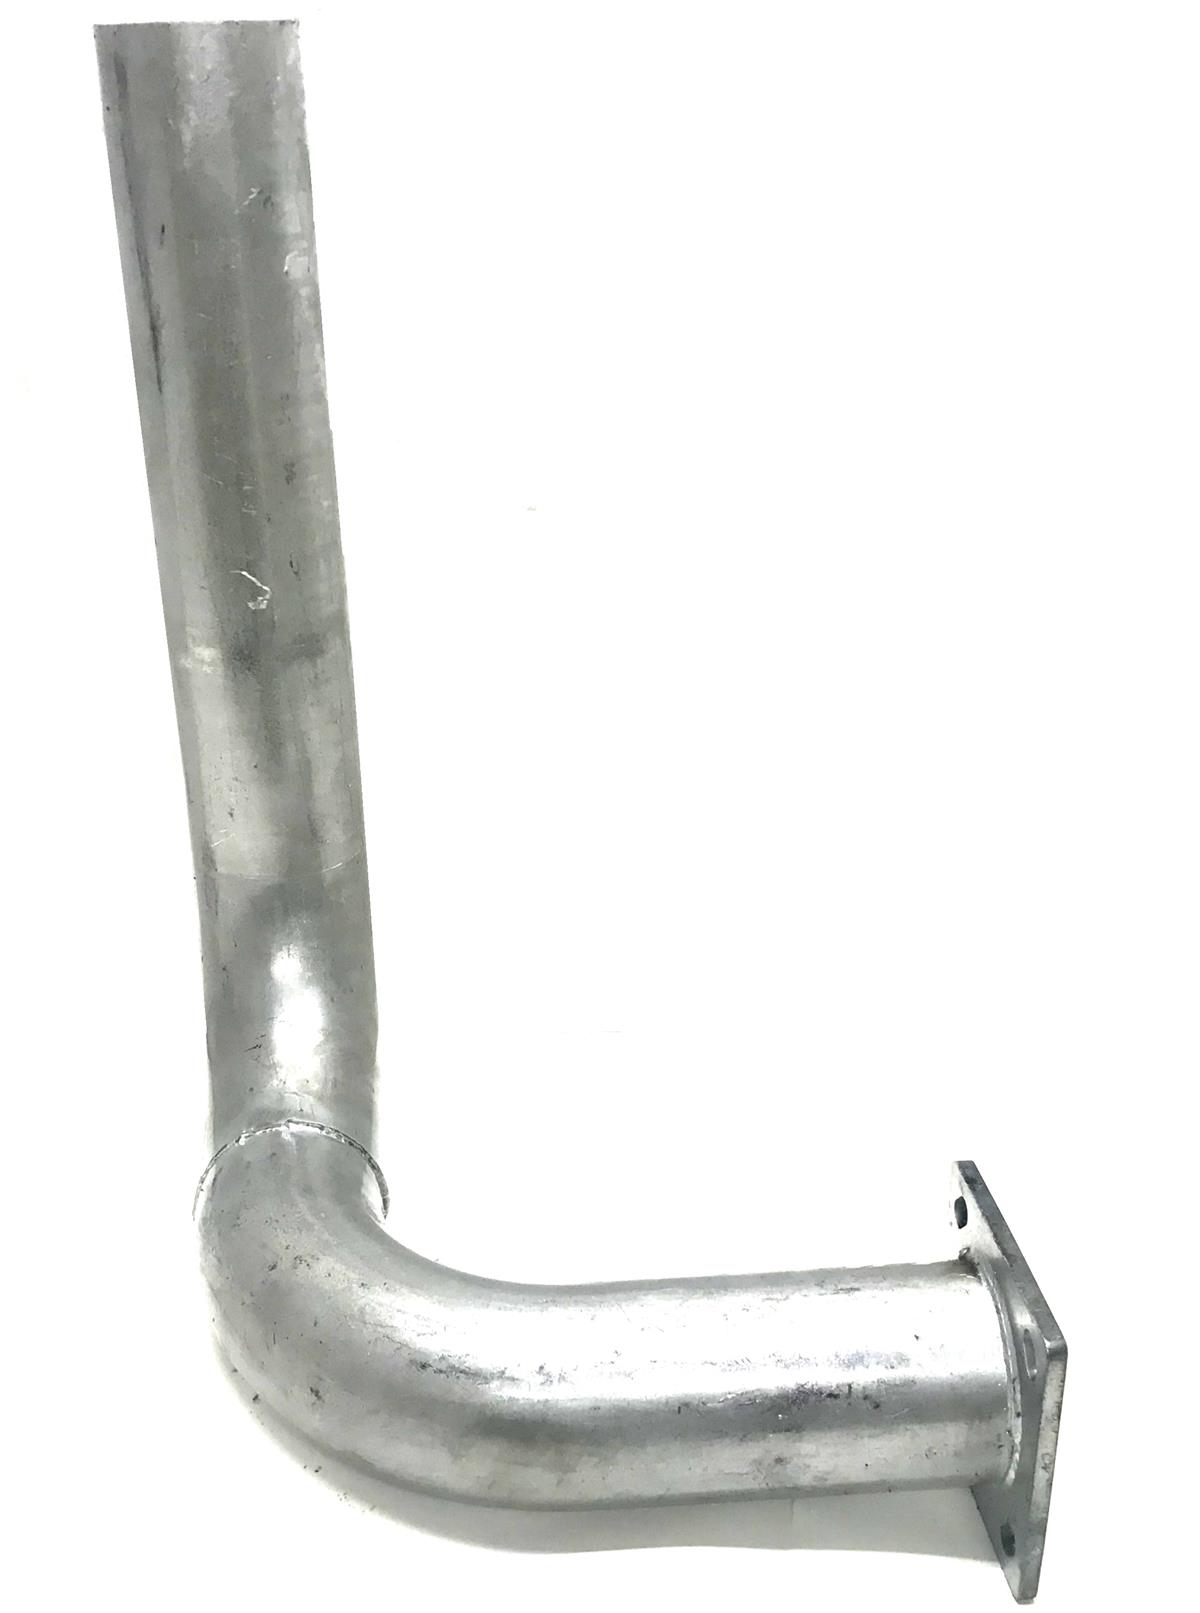 5T-598 | 5T-598  Exhaust Pipe Muffler to Stack M809 (NOS) (440).jpg